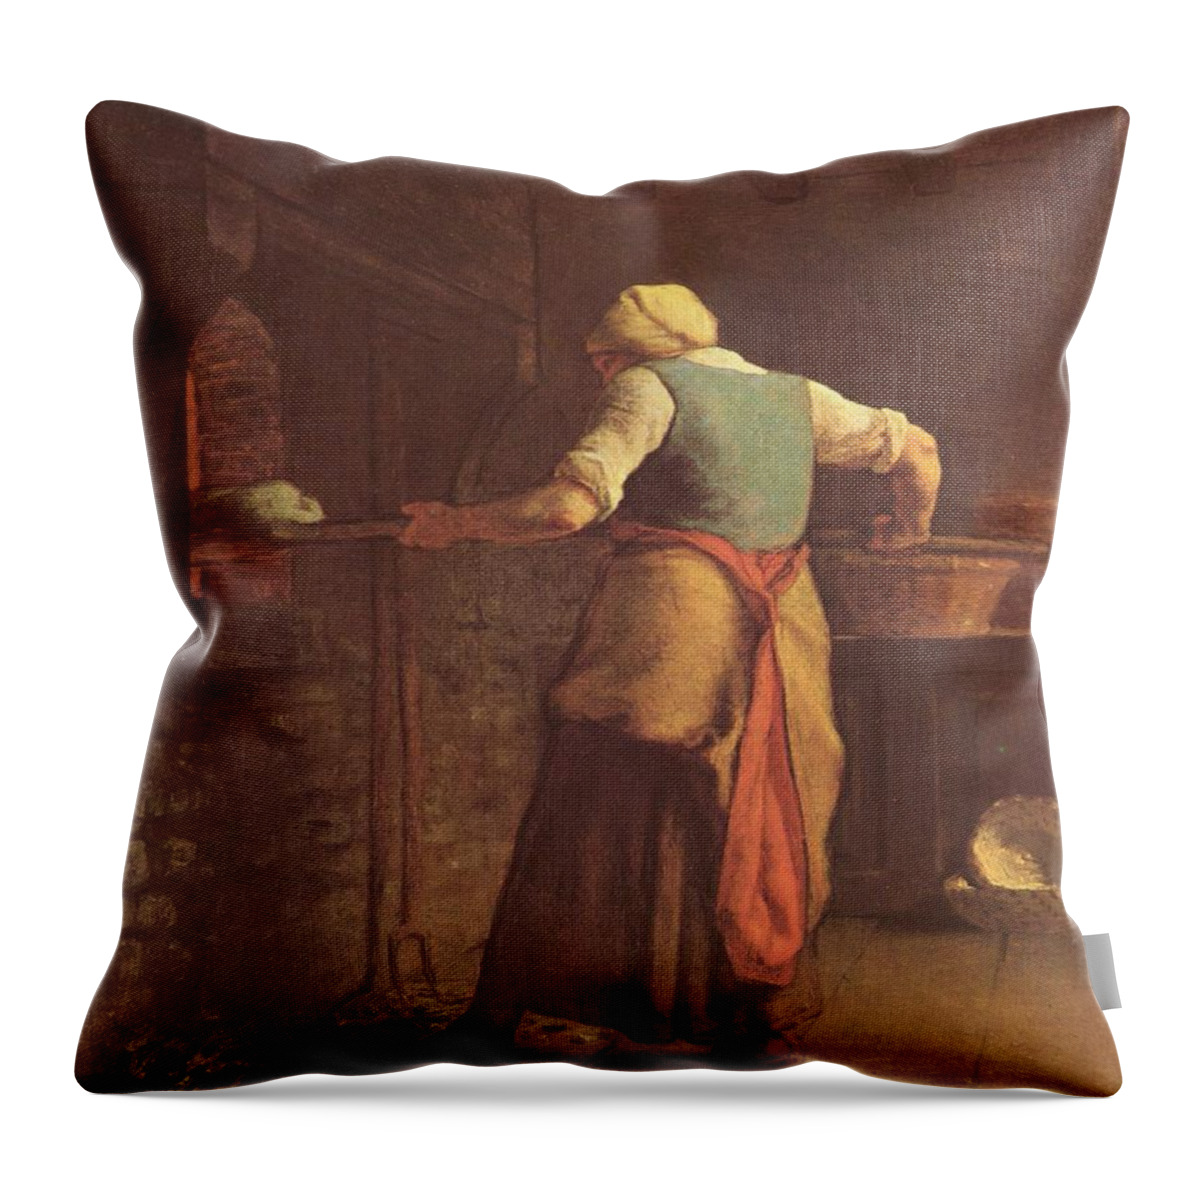 Woman Baking Bread - Jean-francois Millet Throw Pillow featuring the painting Woman baking bread by MotionAge Designs